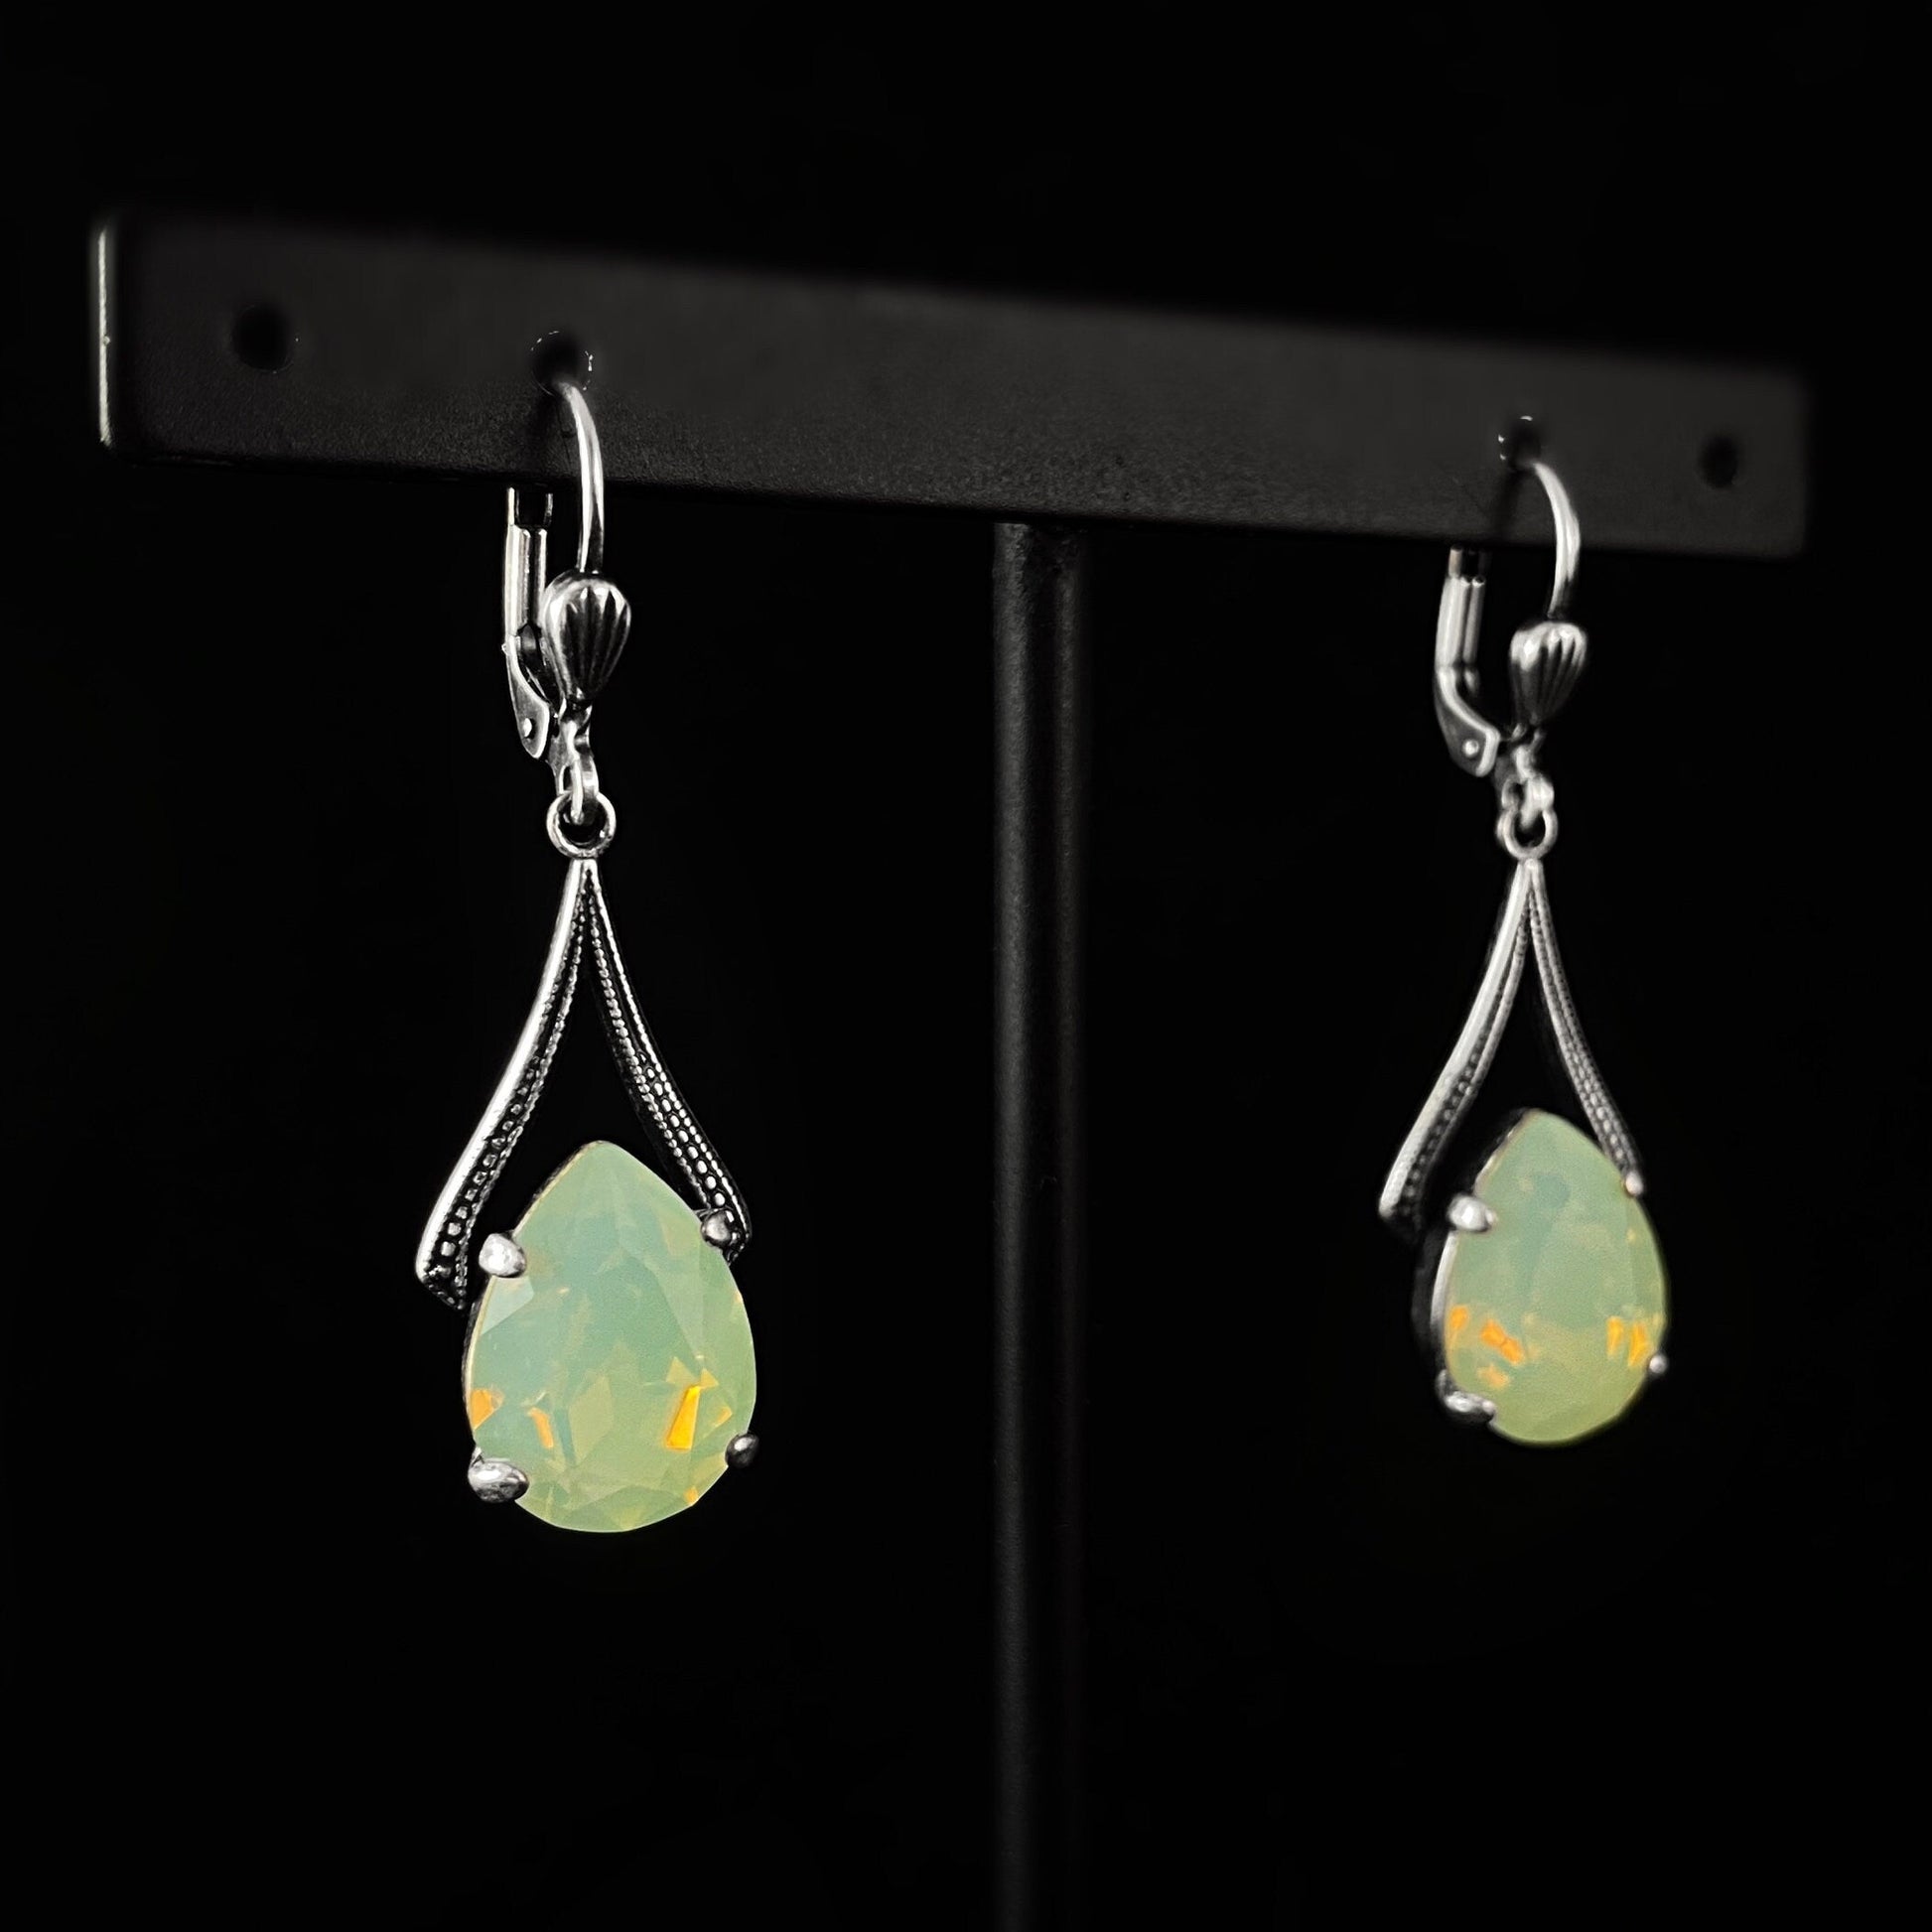 Silver Earrings with Milky Opal Teardrop Cut Swarovski Crystals and Silver Accents - La Vie Parisienne by Catherine Popesco